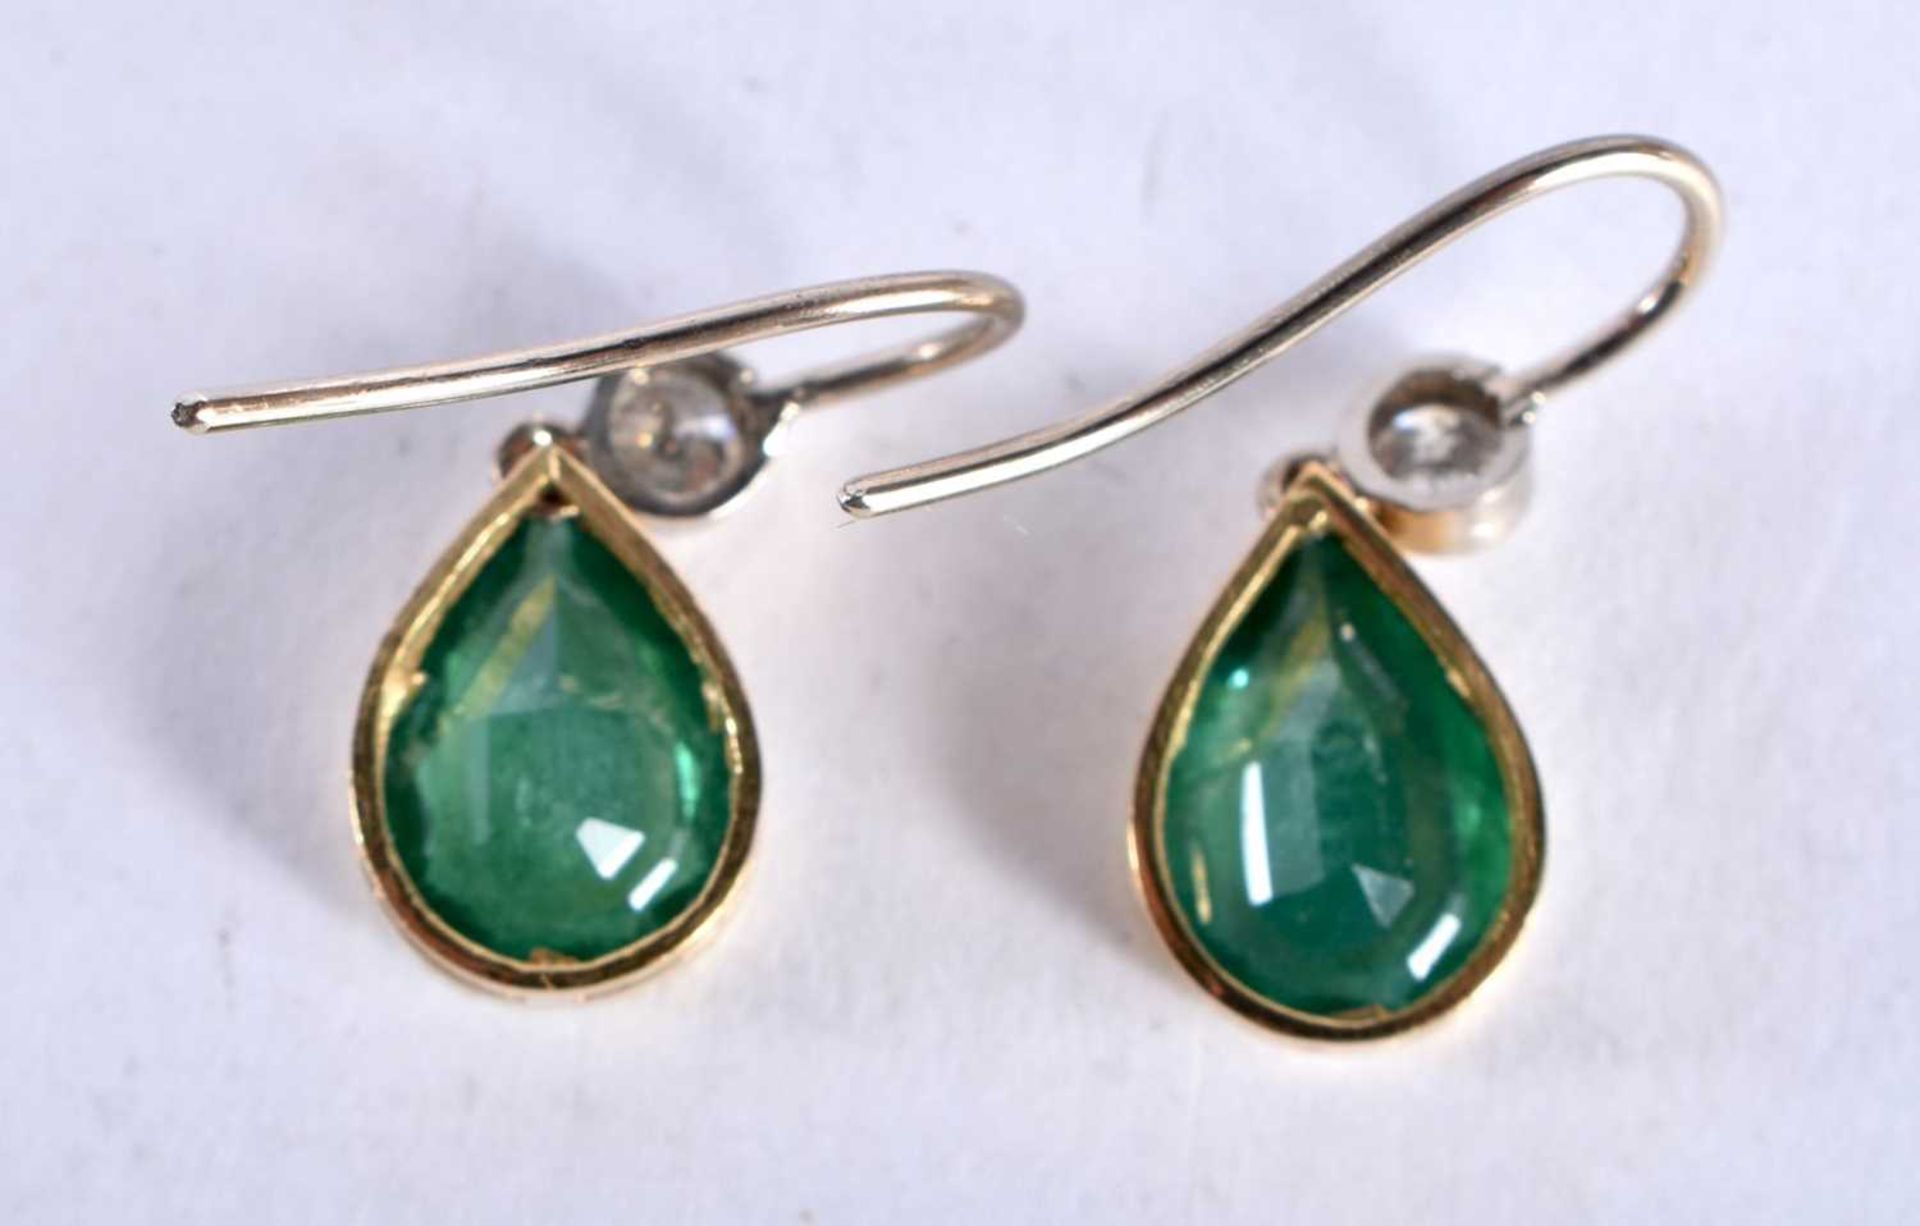 A PAIR OF 18CT GOLD DIAMOND AND EMERALD EARRINGS each emerald 10 mm x 8 mm and approx 1.25 cts each. - Image 2 of 8